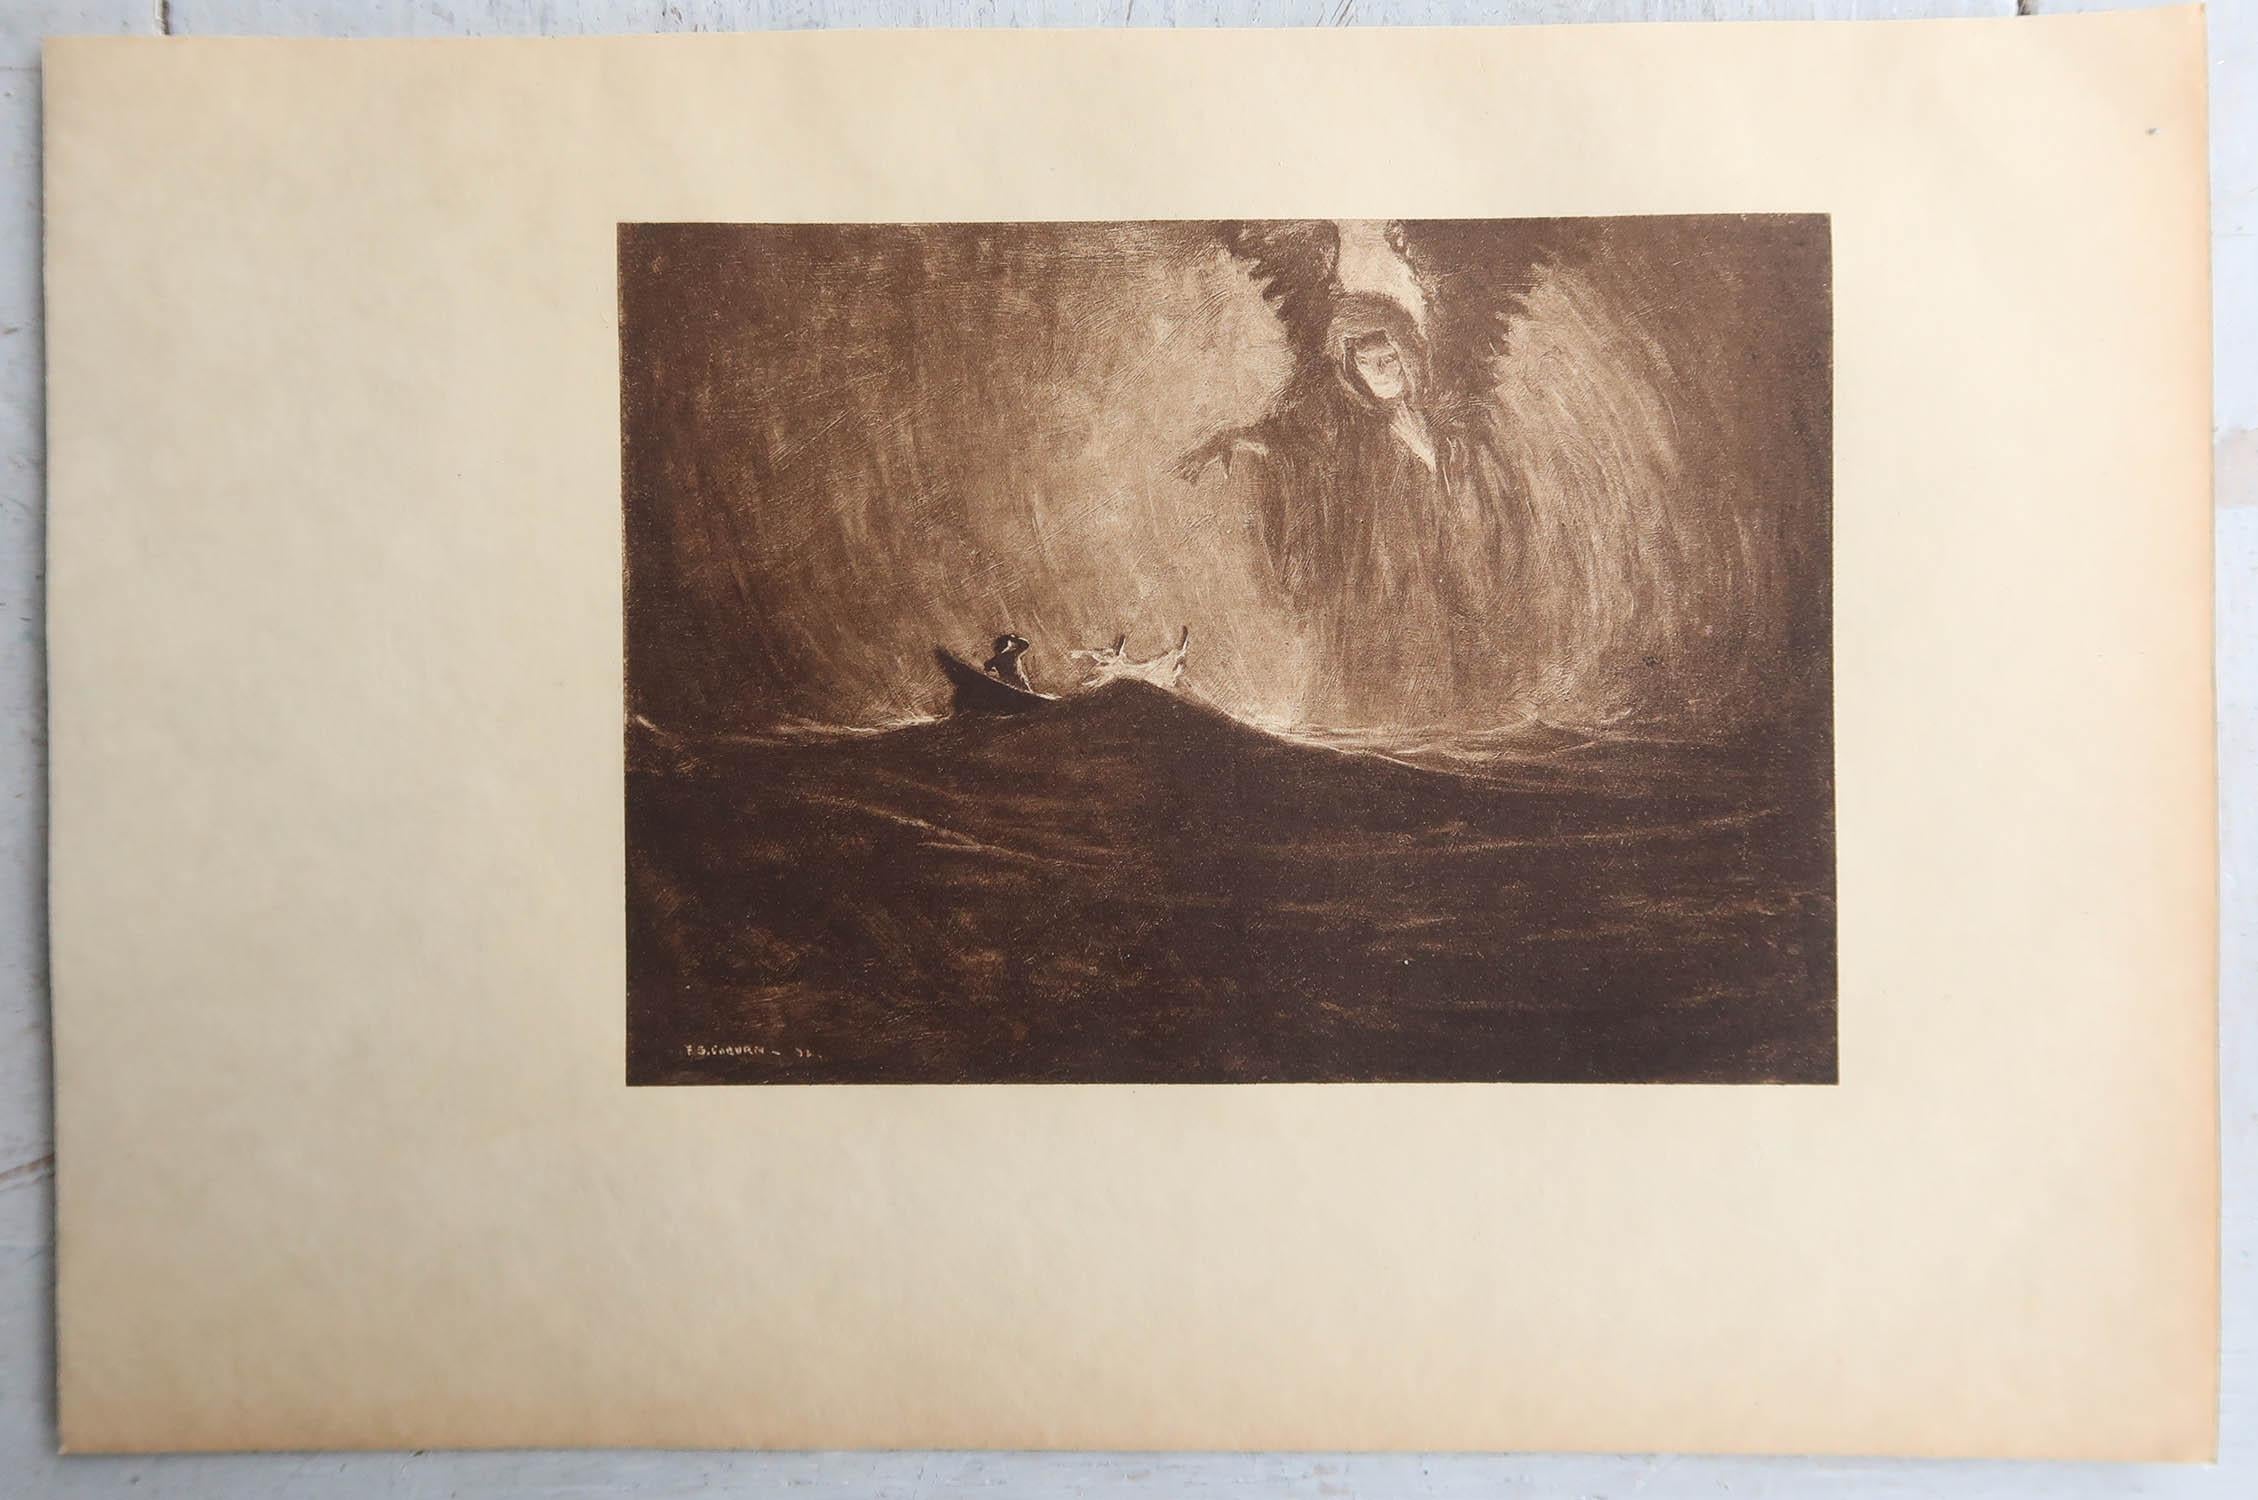 Romantic Original Limited Edition Print by Frederick S. Coburn, Narrative of Arthur G.Pym For Sale